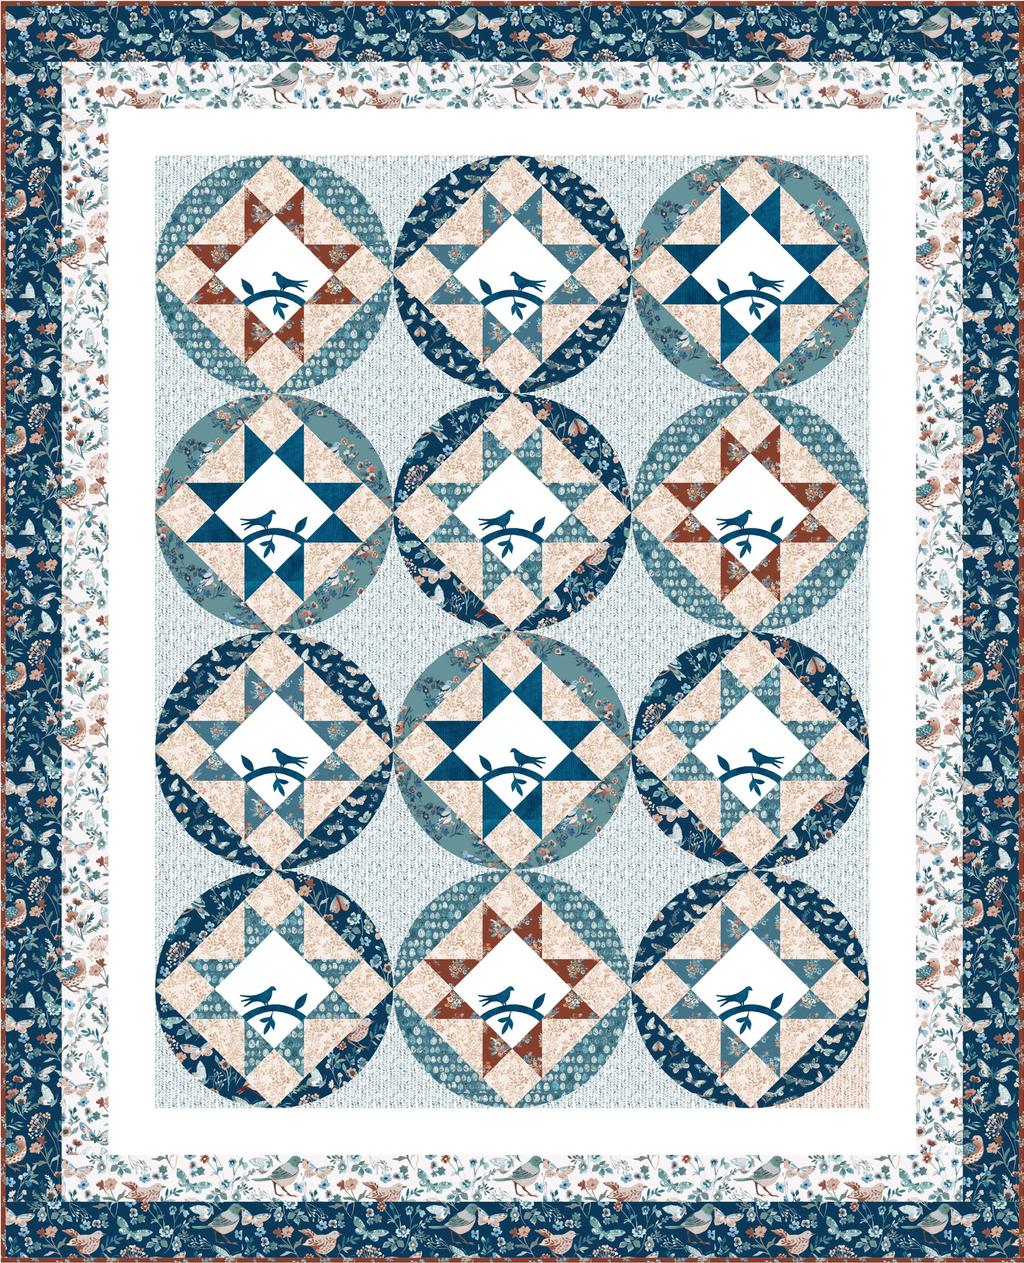 x 67 FREE PROJET this is a digital representation of the quilt top, fabric may vary.